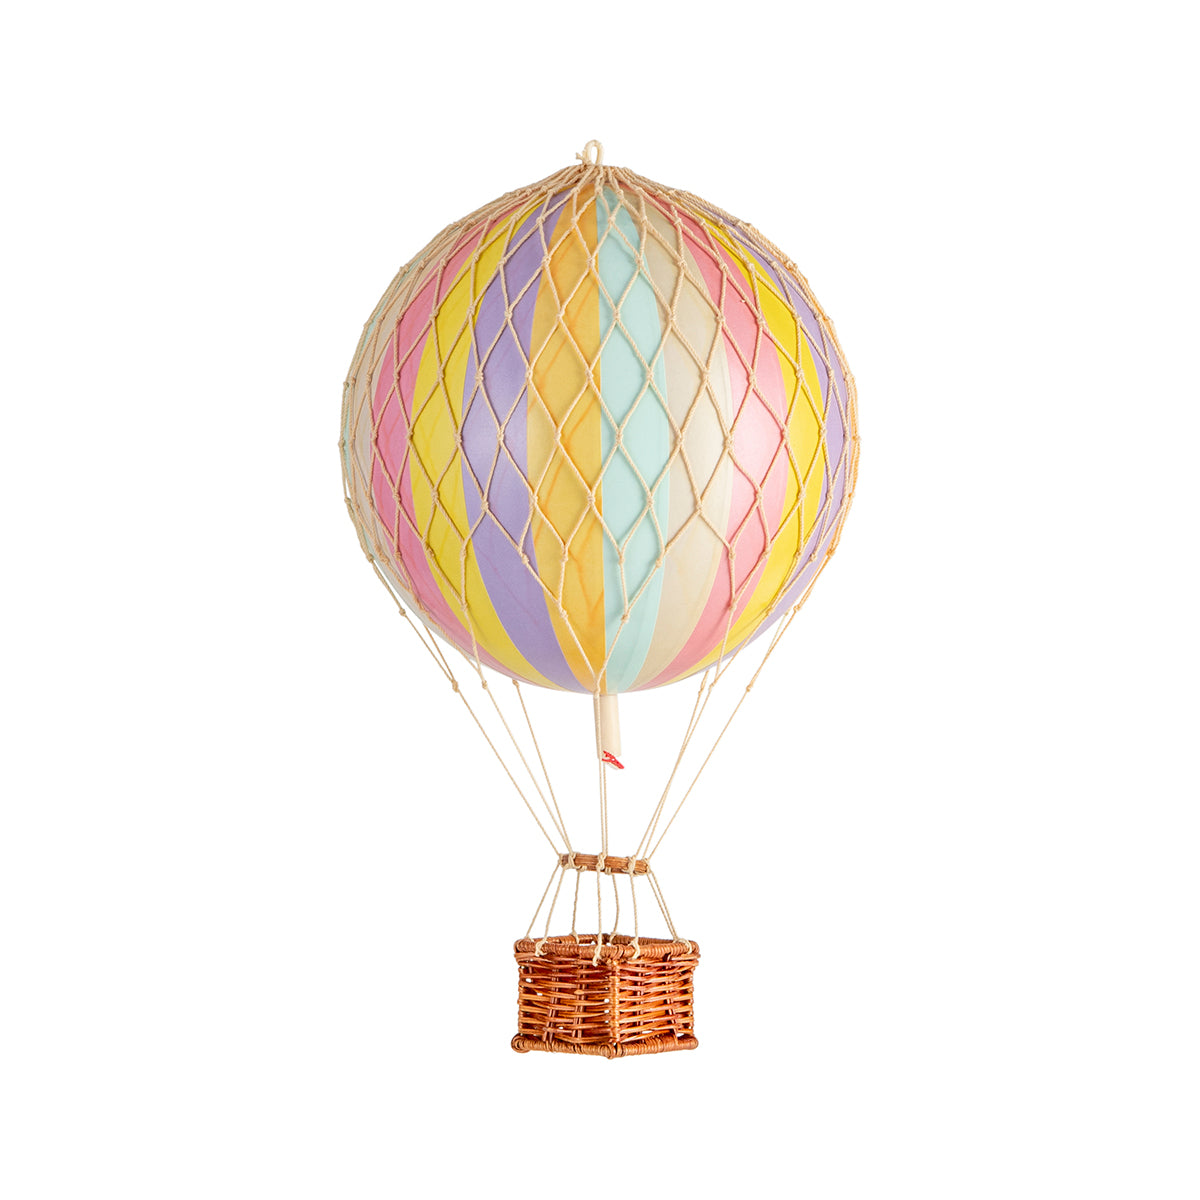 A Wonderen Small Hot Air Balloon - Travels Light with a wicker basket on a white background.